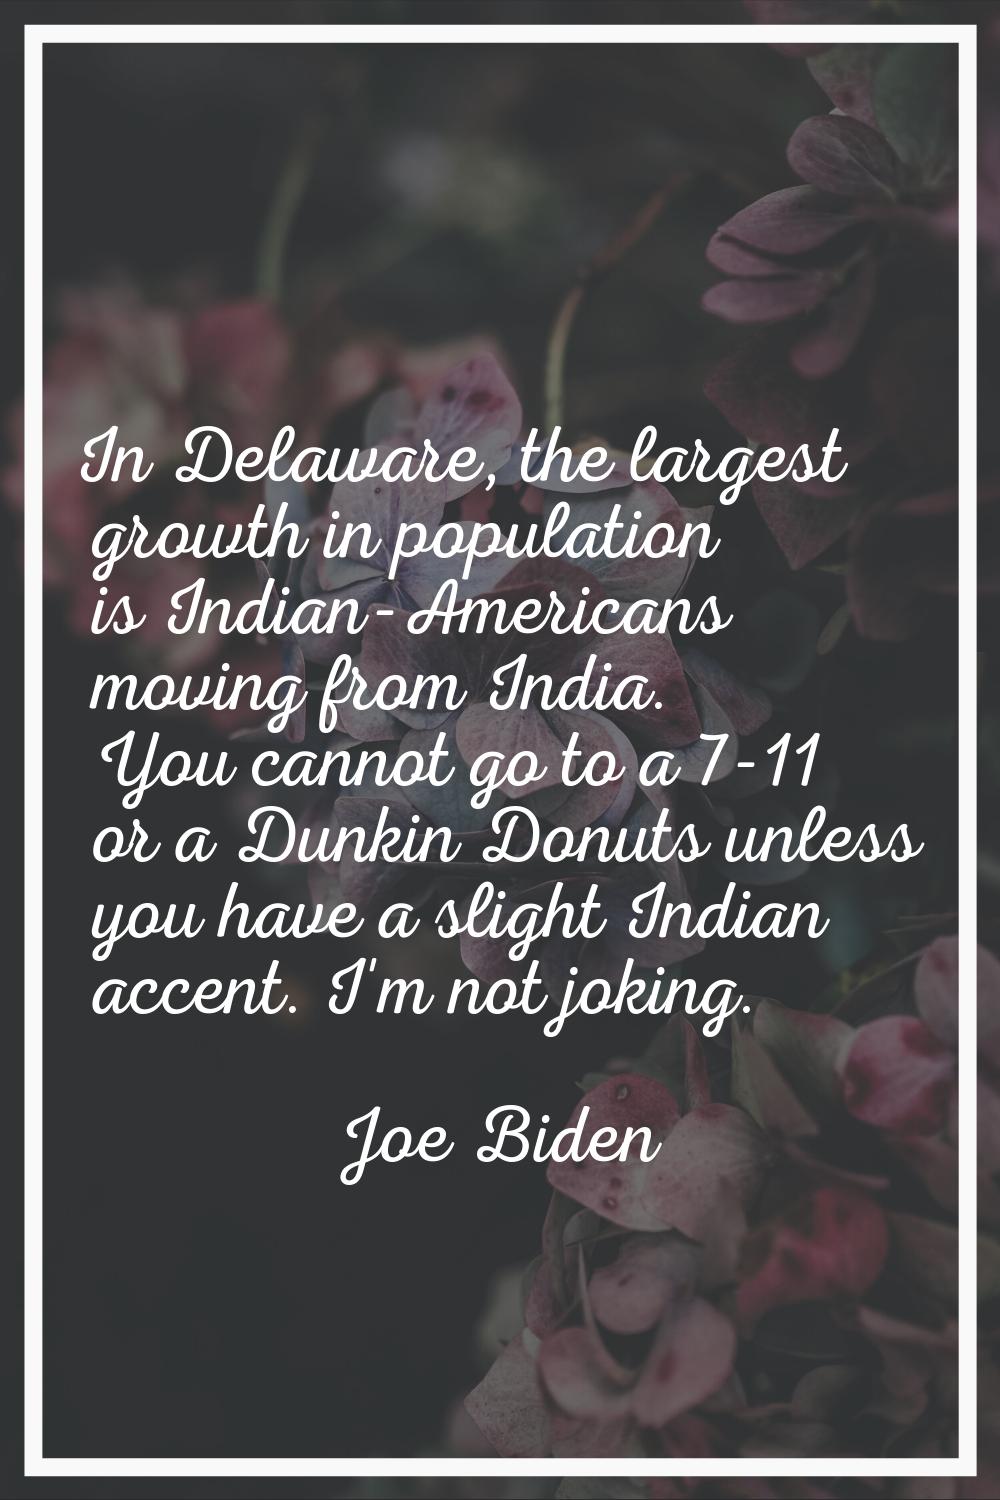 In Delaware, the largest growth in population is Indian-Americans moving from India. You cannot go 